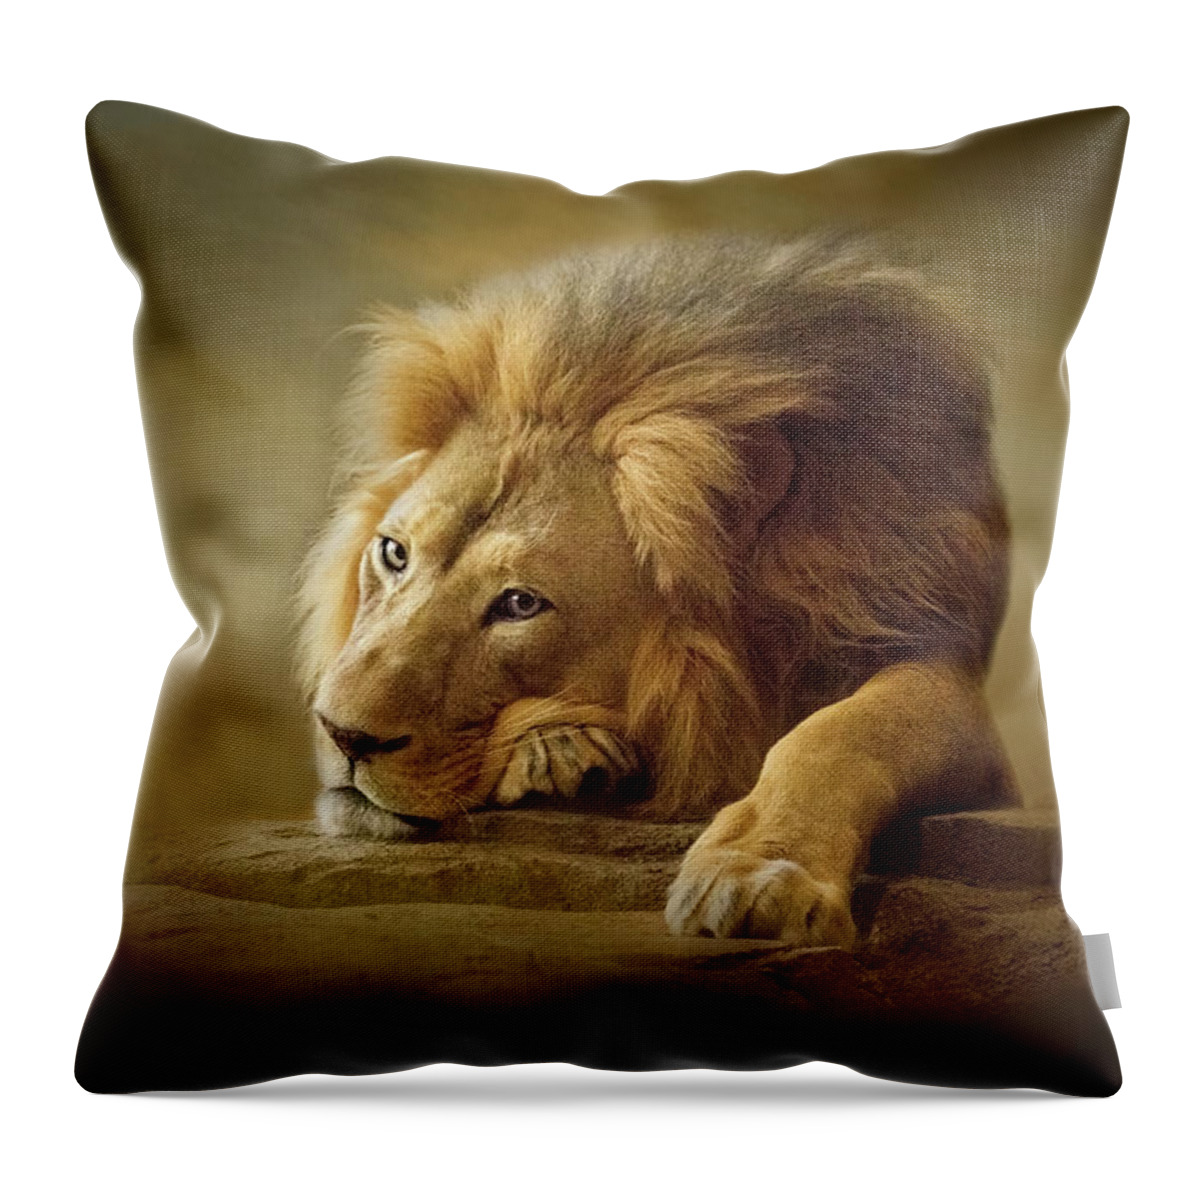 Lion Throw Pillow featuring the digital art Gentle Soul by Nicole Wilde